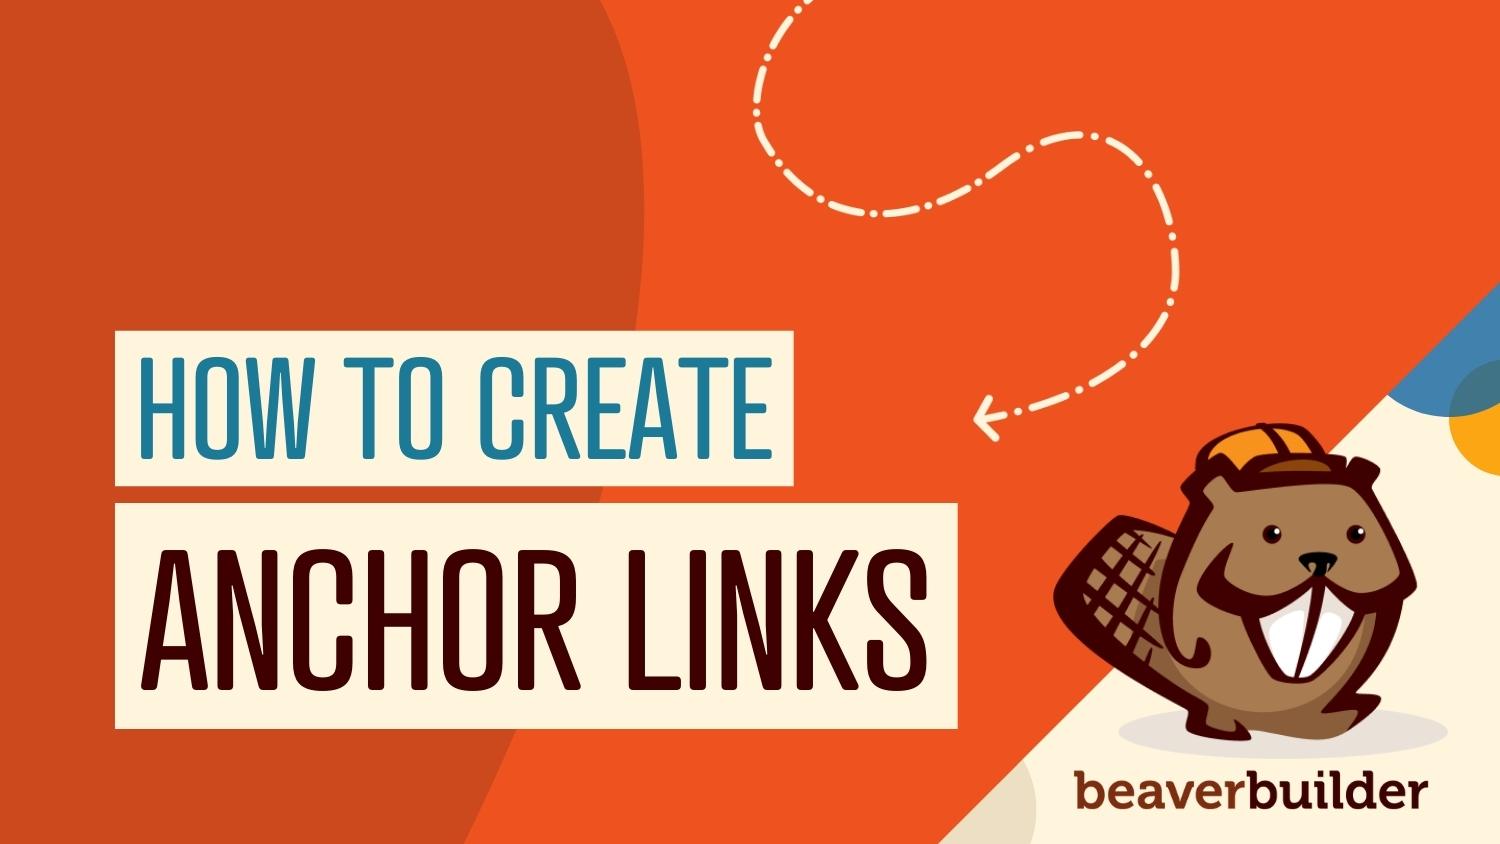 How to Create Anchor Links using Beaver Builder